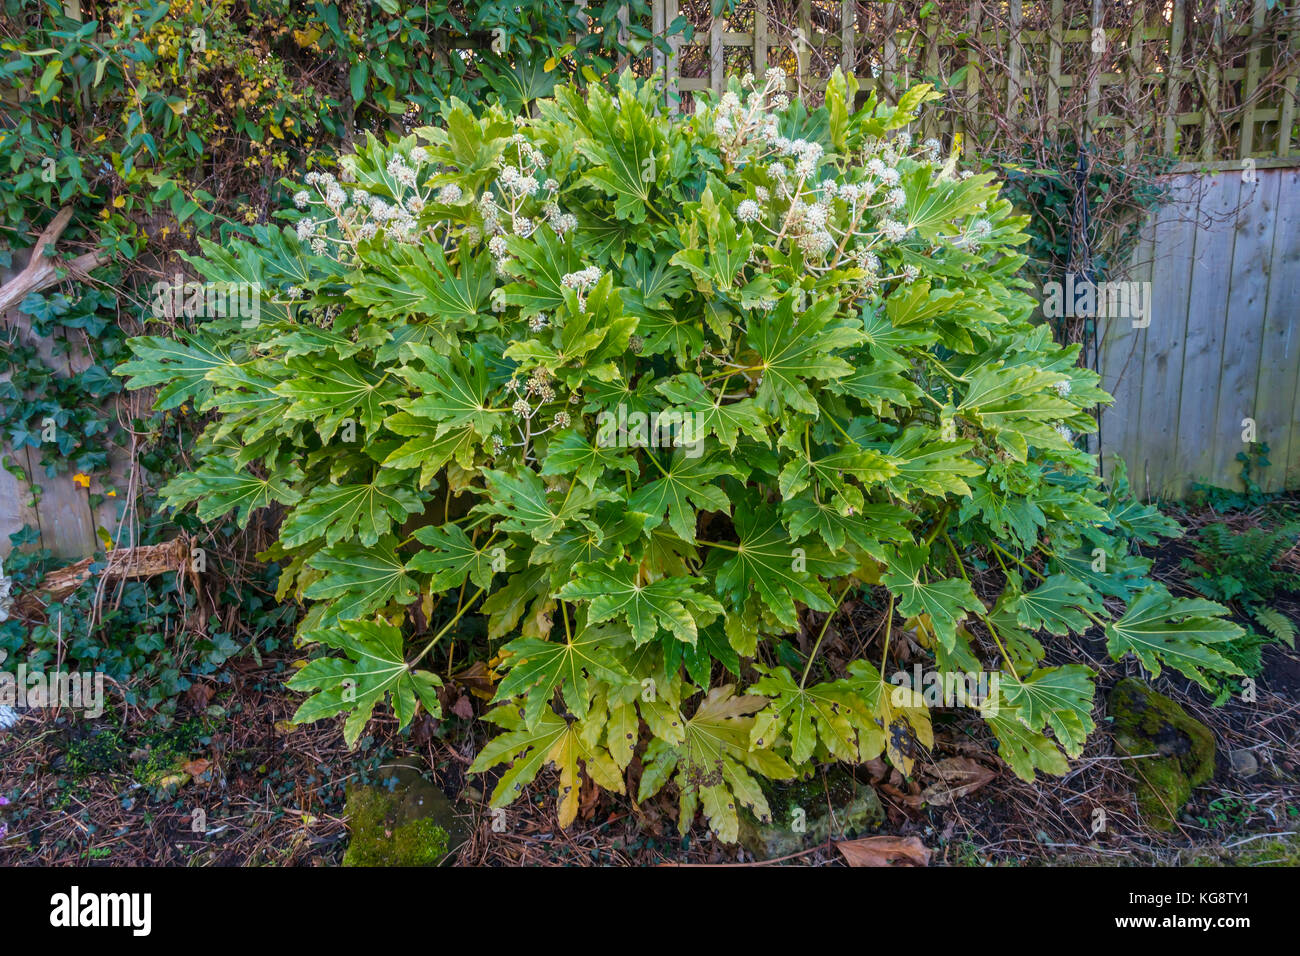 Fatsia japonica (Fatsi) or Japanese Aralia japonica flowering in North Yorkshire England in November 2017 Stock Photo